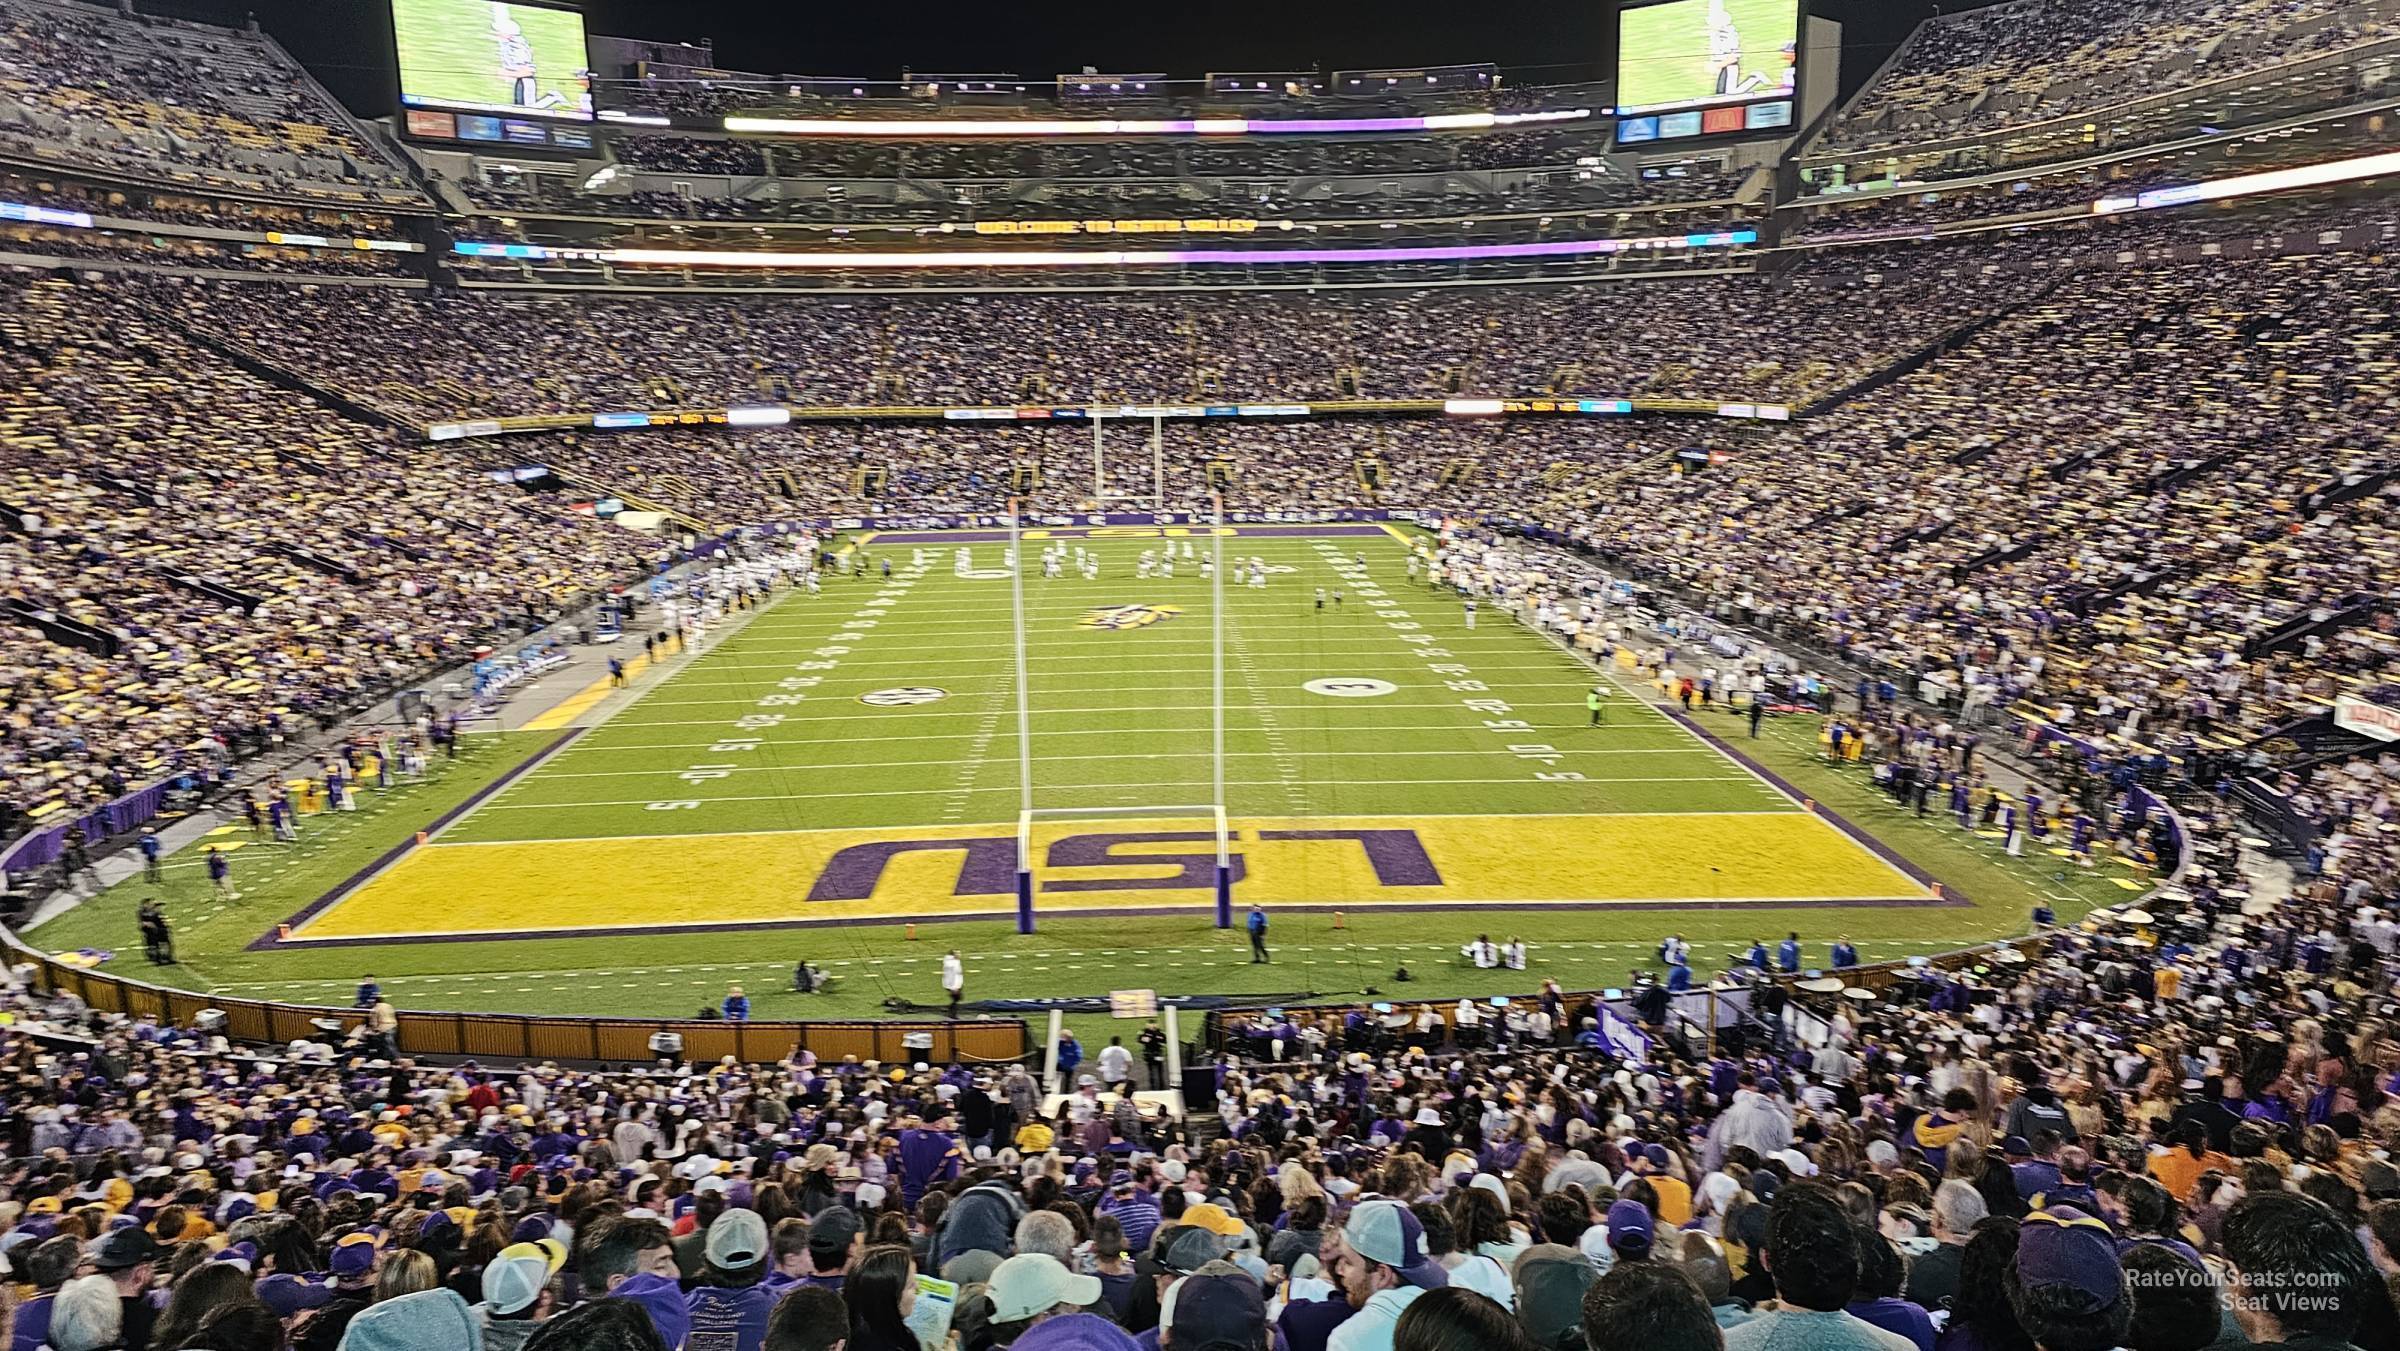 section 233, row 1 seat view  - tiger stadium